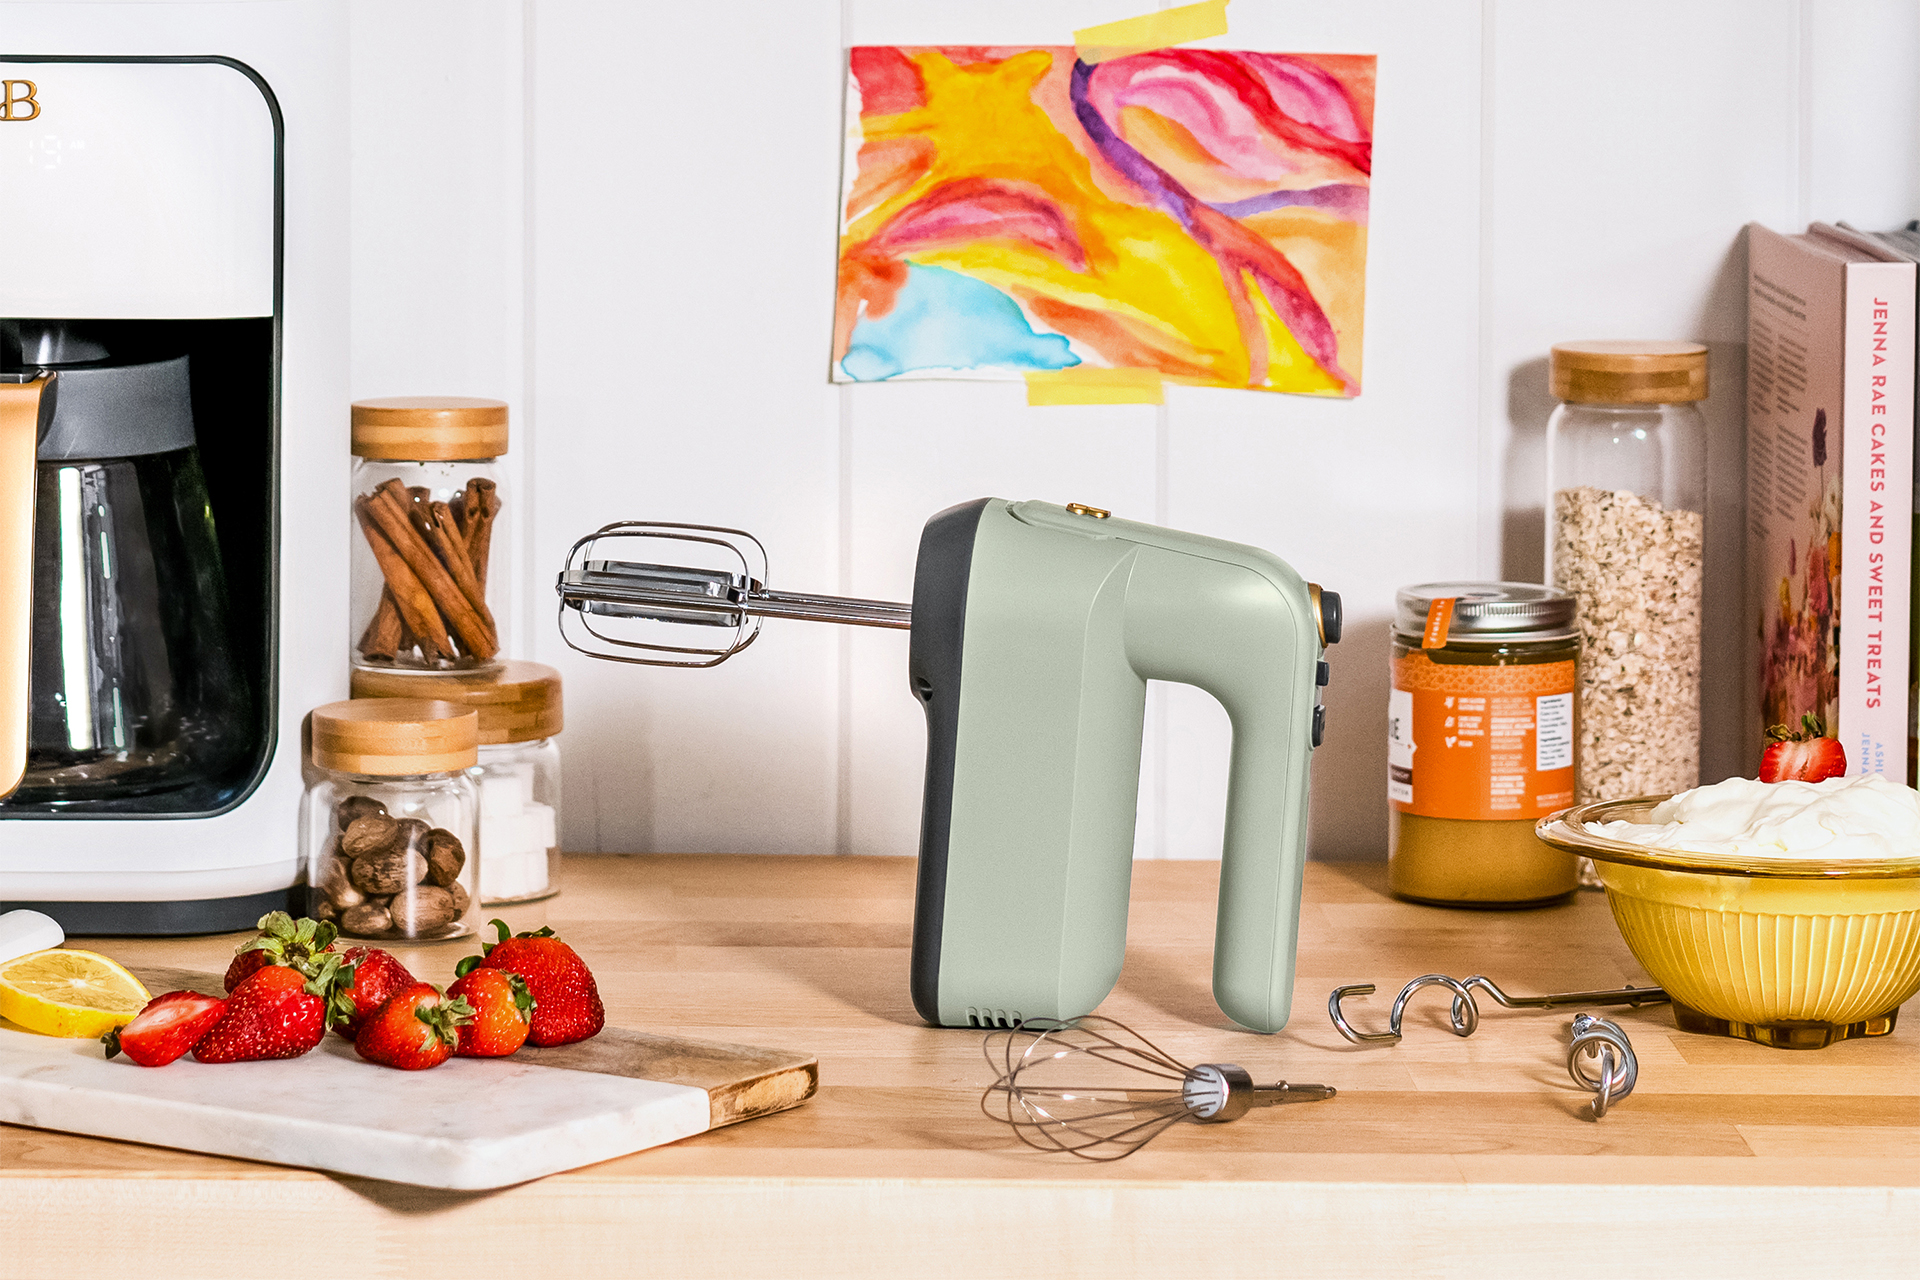 Exclusive brand Beautiful Kitchenware launches at Walmart